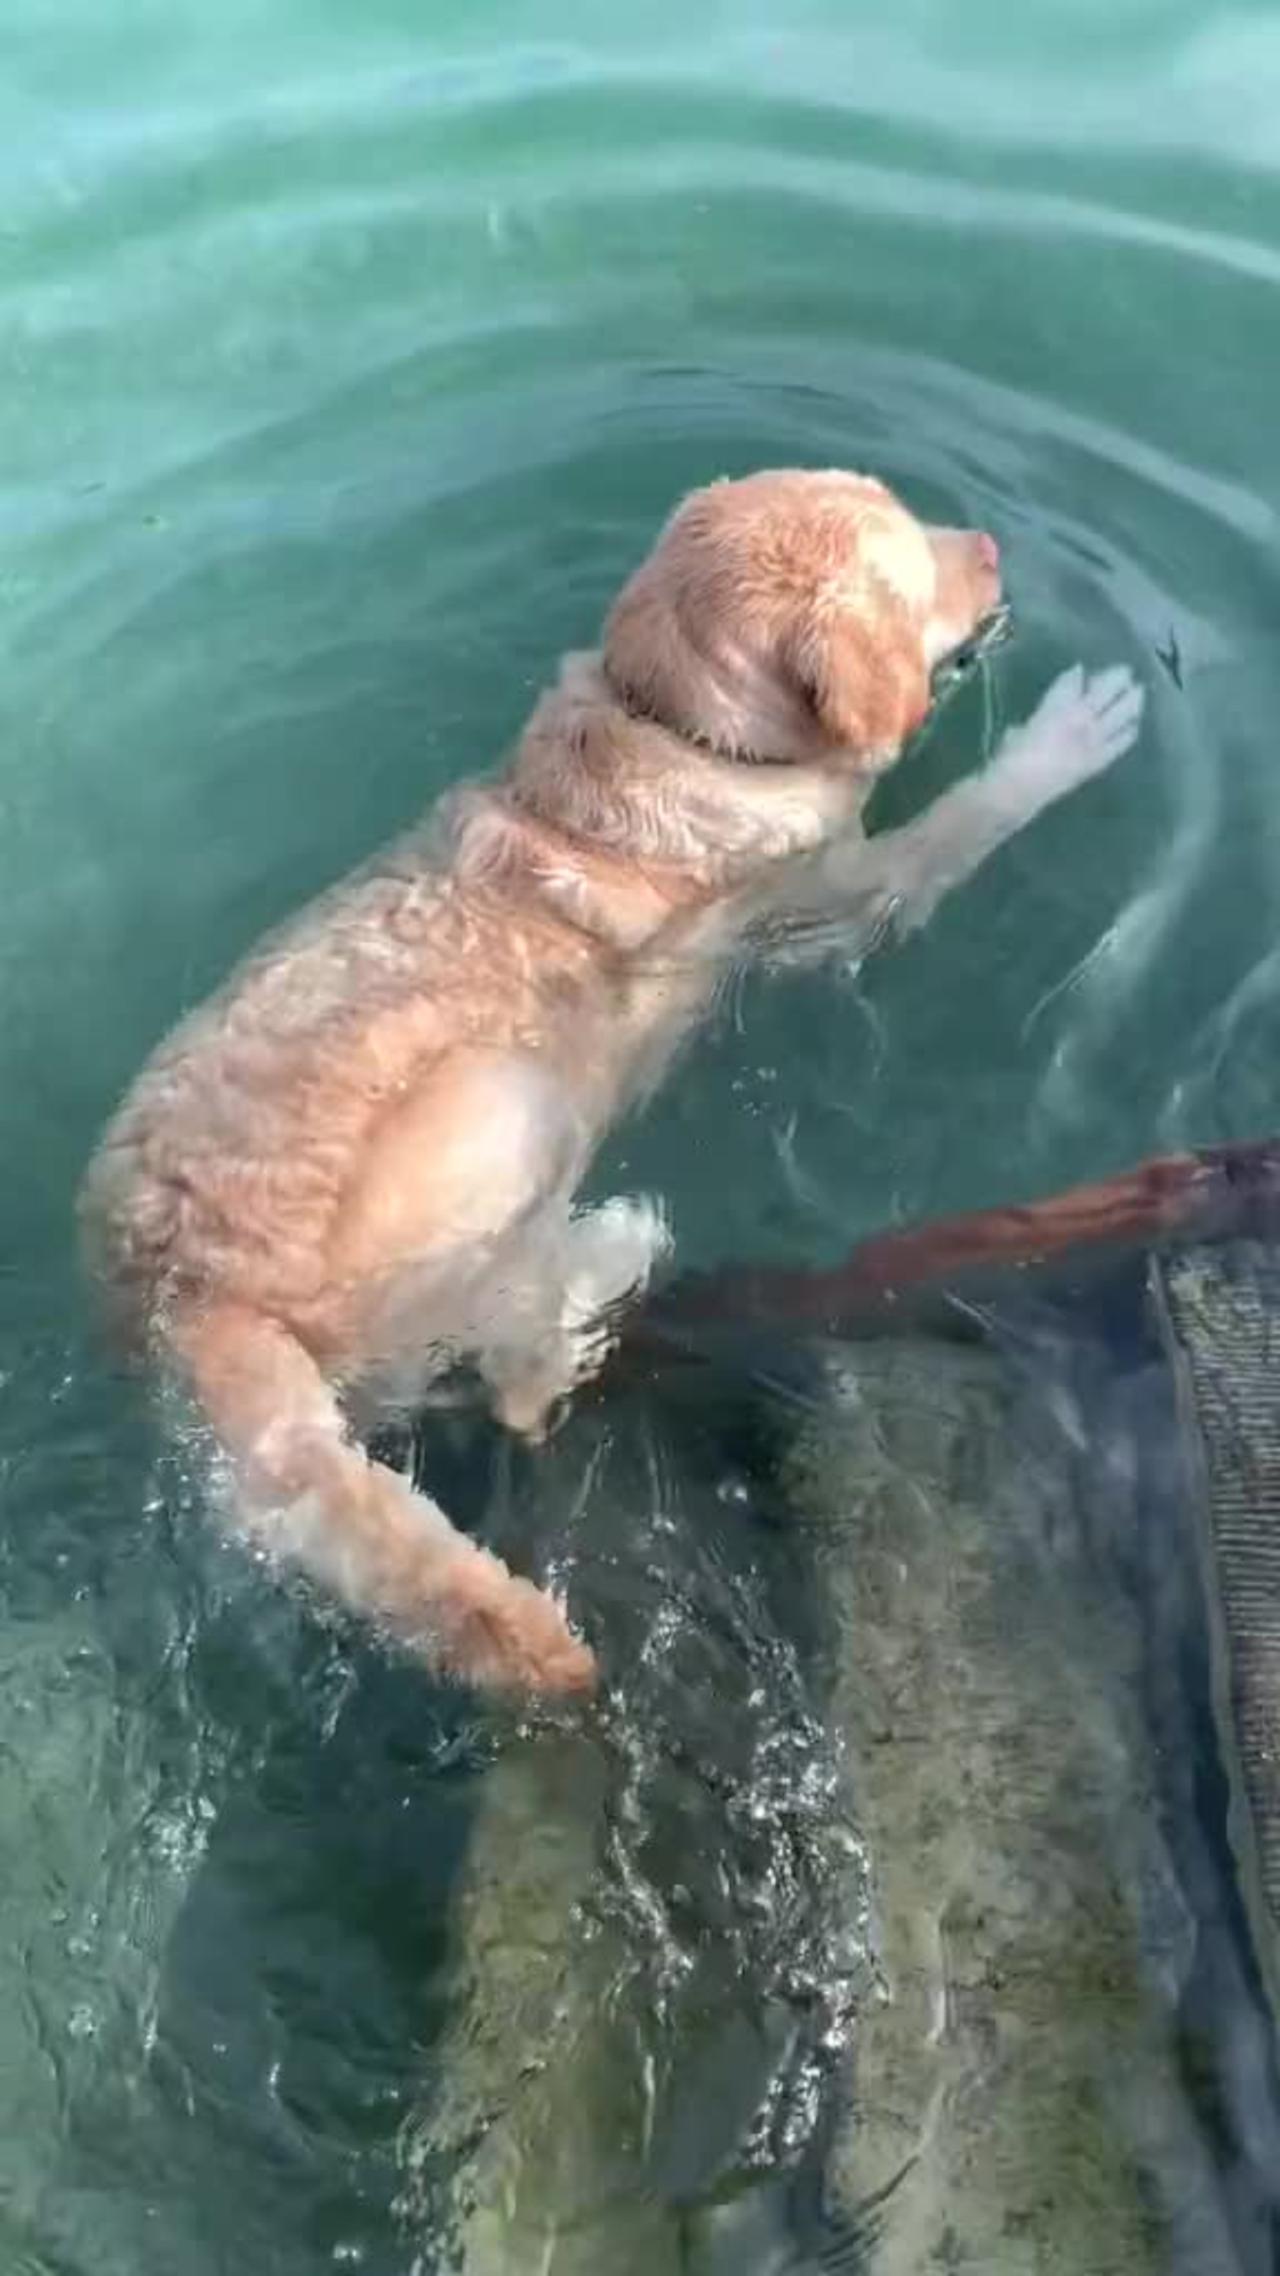 Talented dog flawlessly performs various water tricks